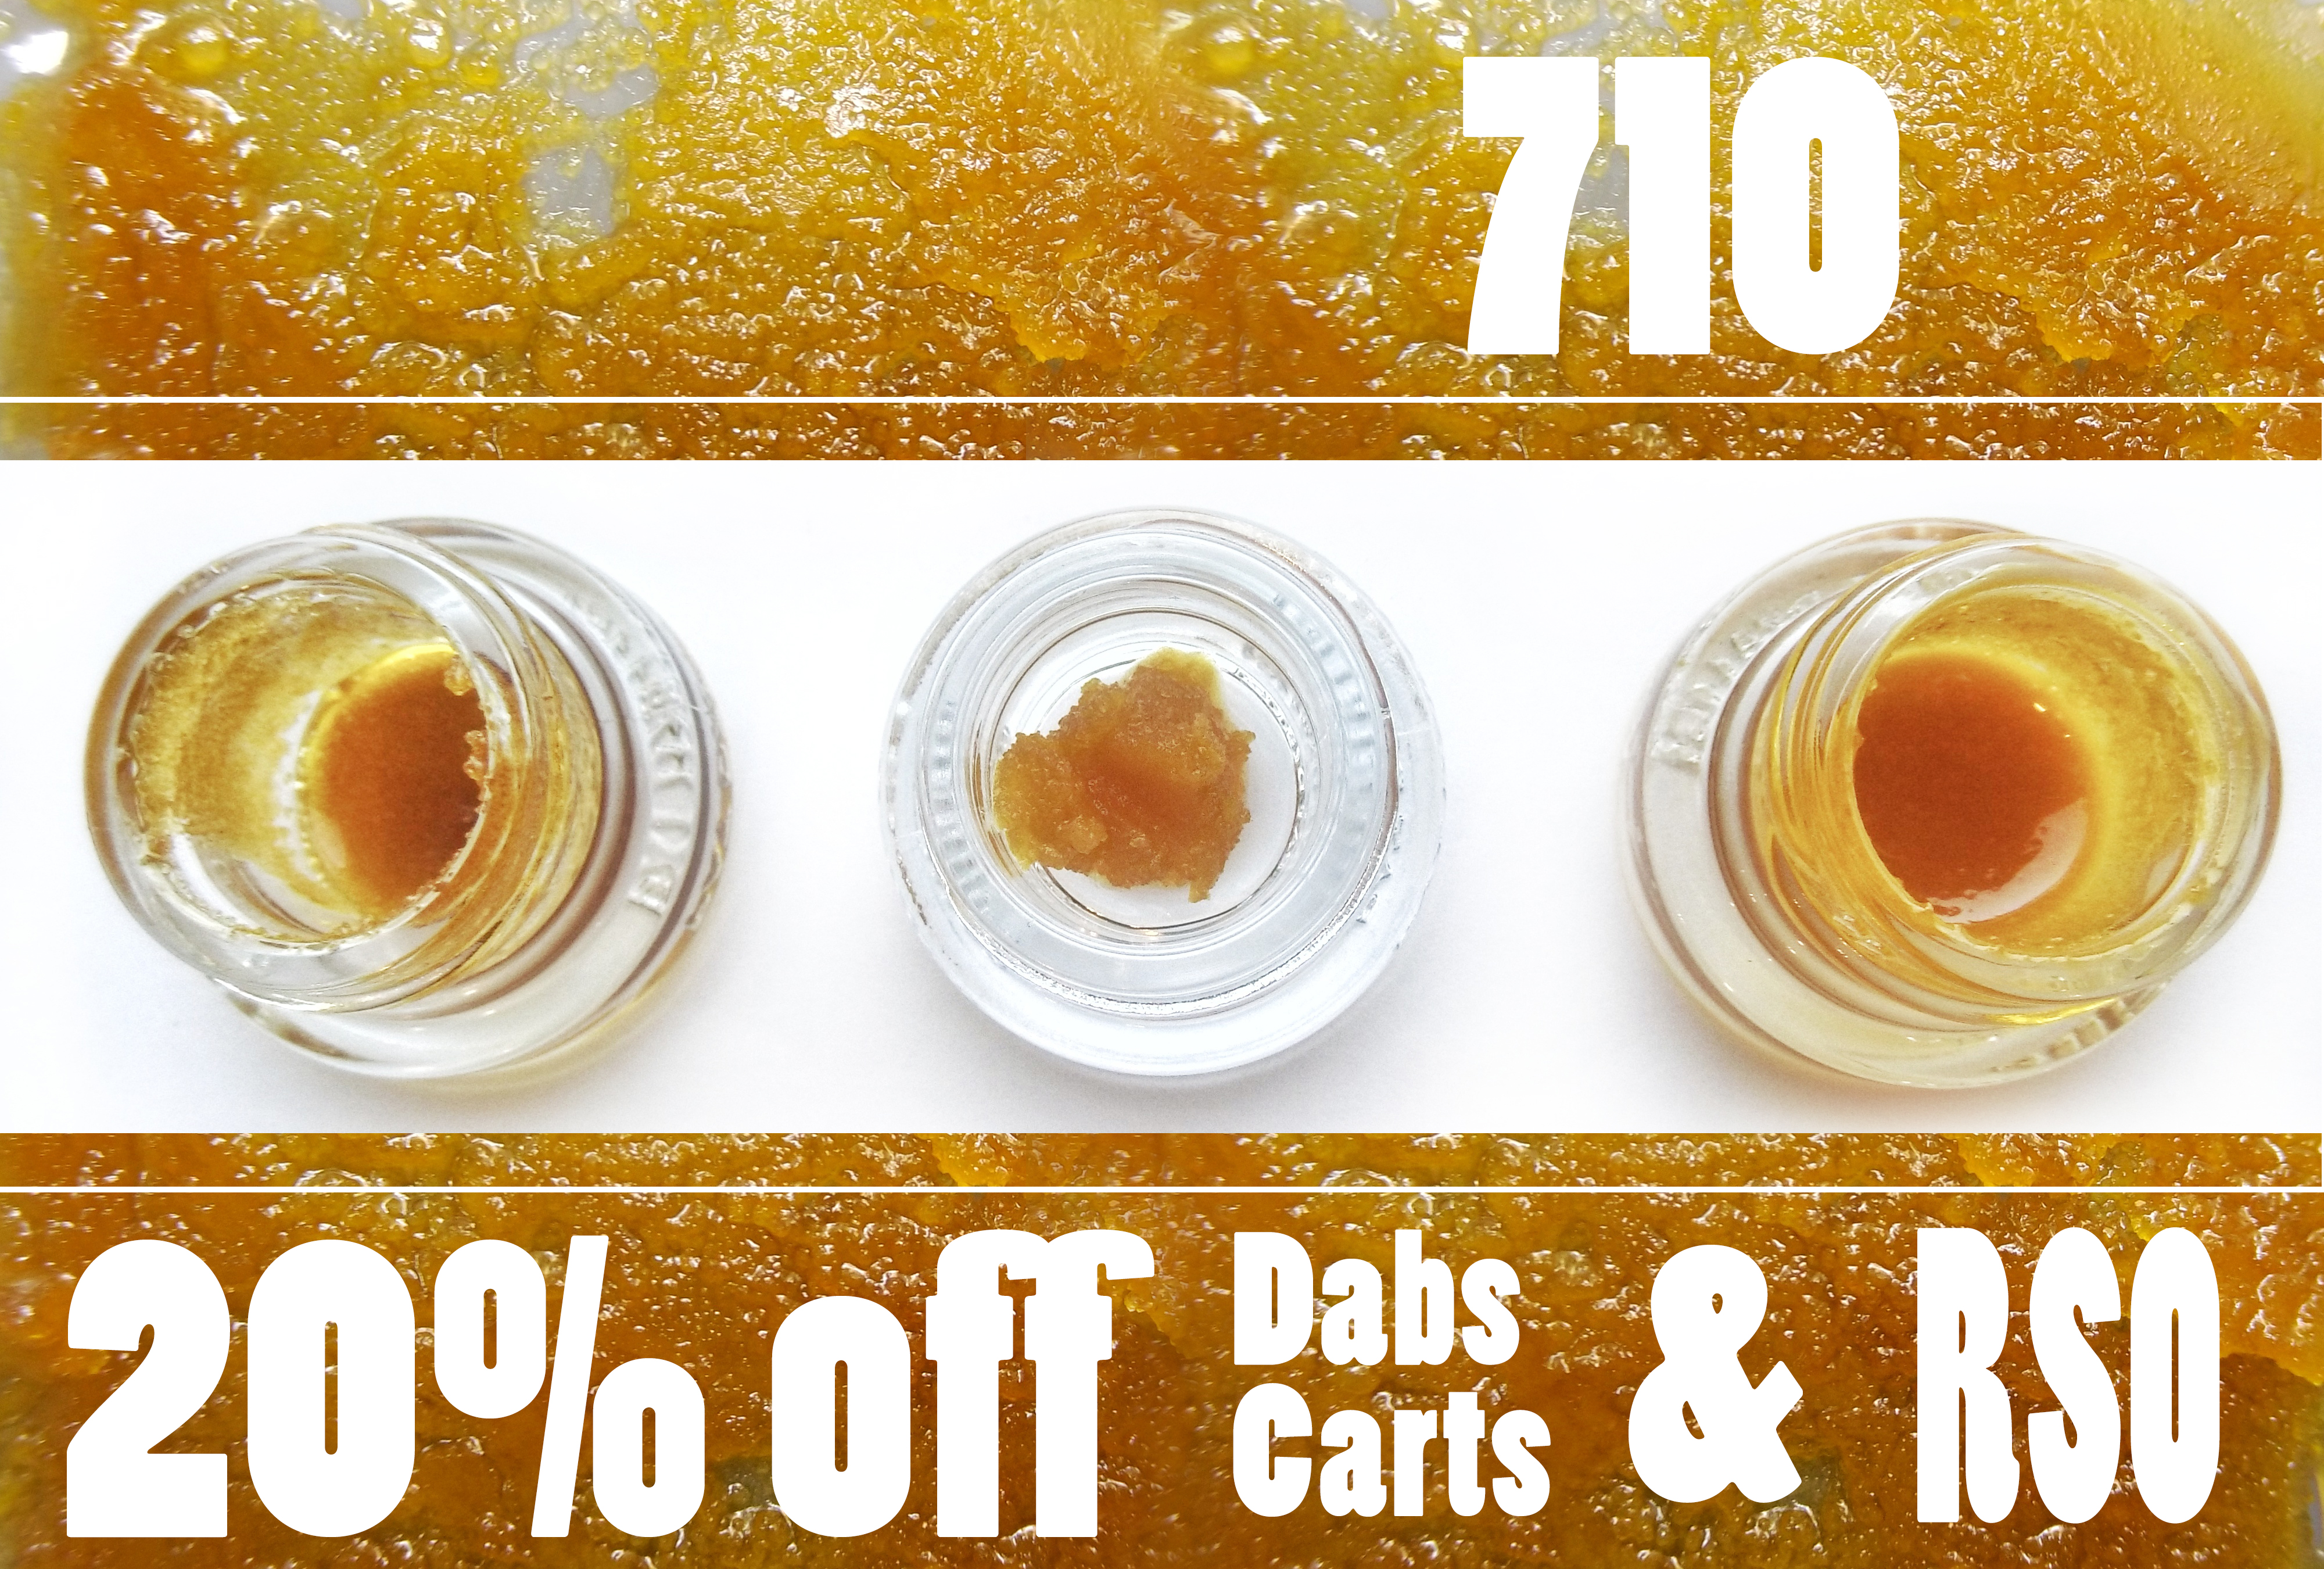 710 national Oil Day deals on dabs at cartridges at Home Grown Apothecary